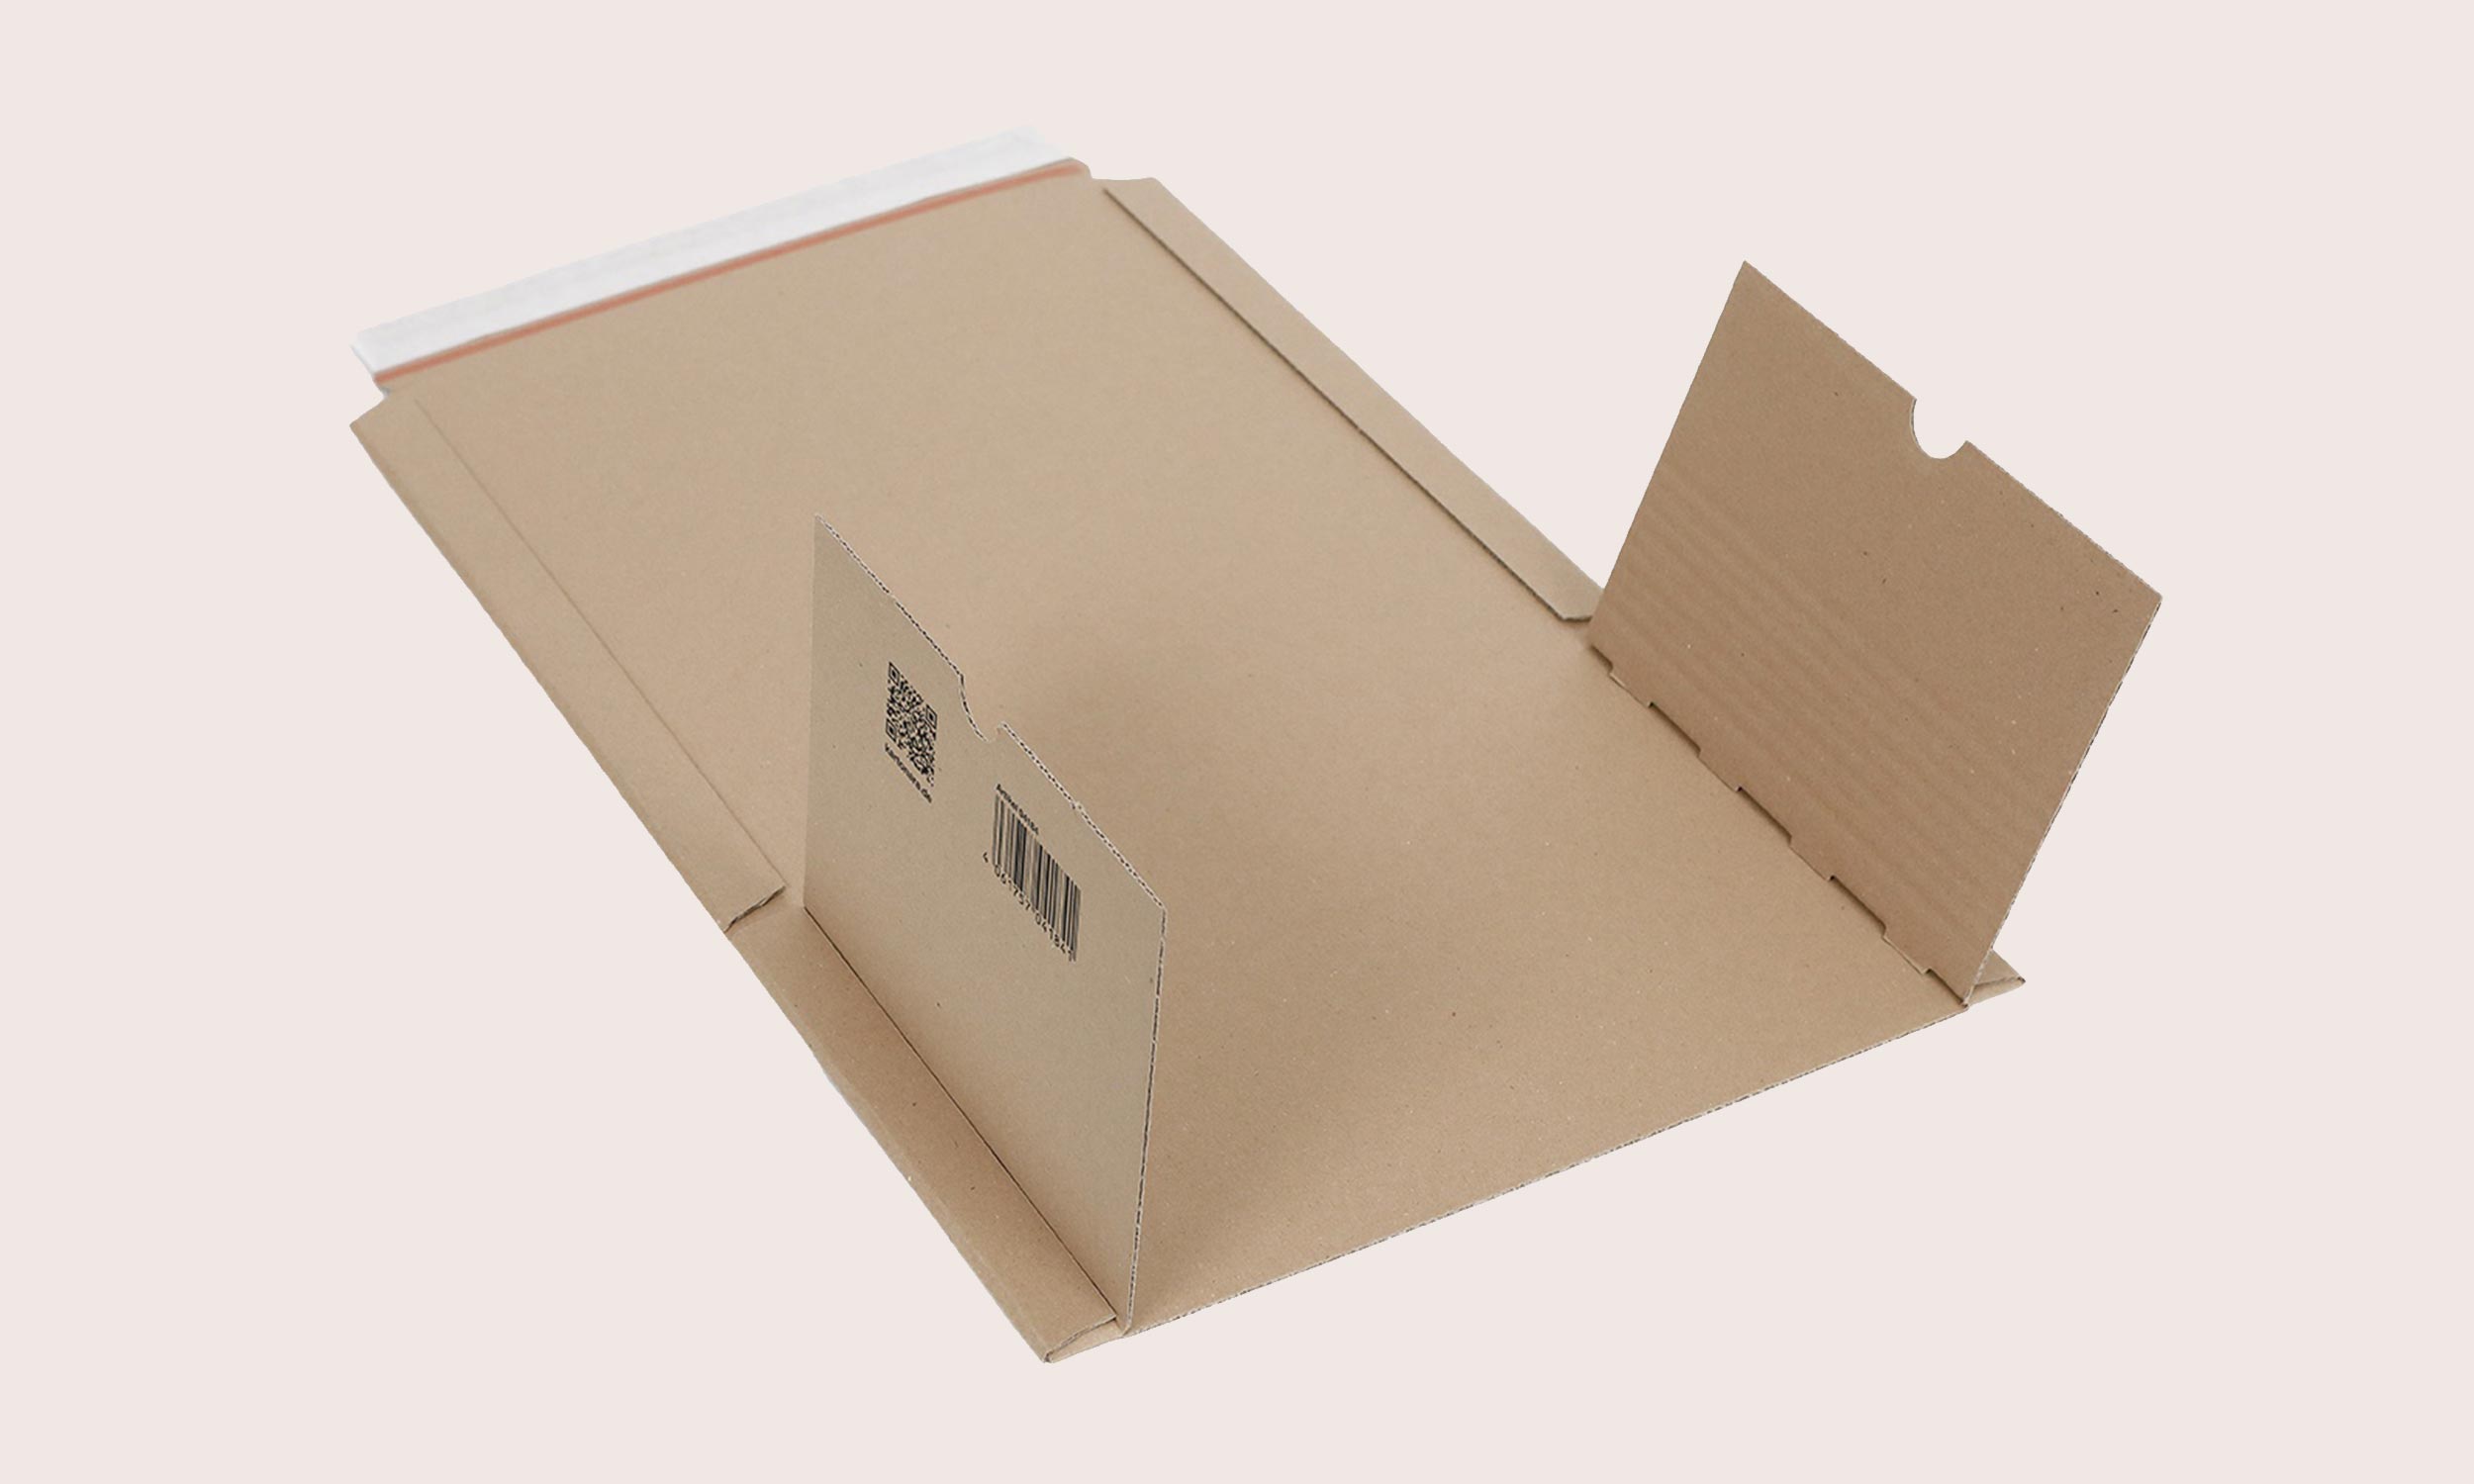 Book packaging made from corrugated cardboard